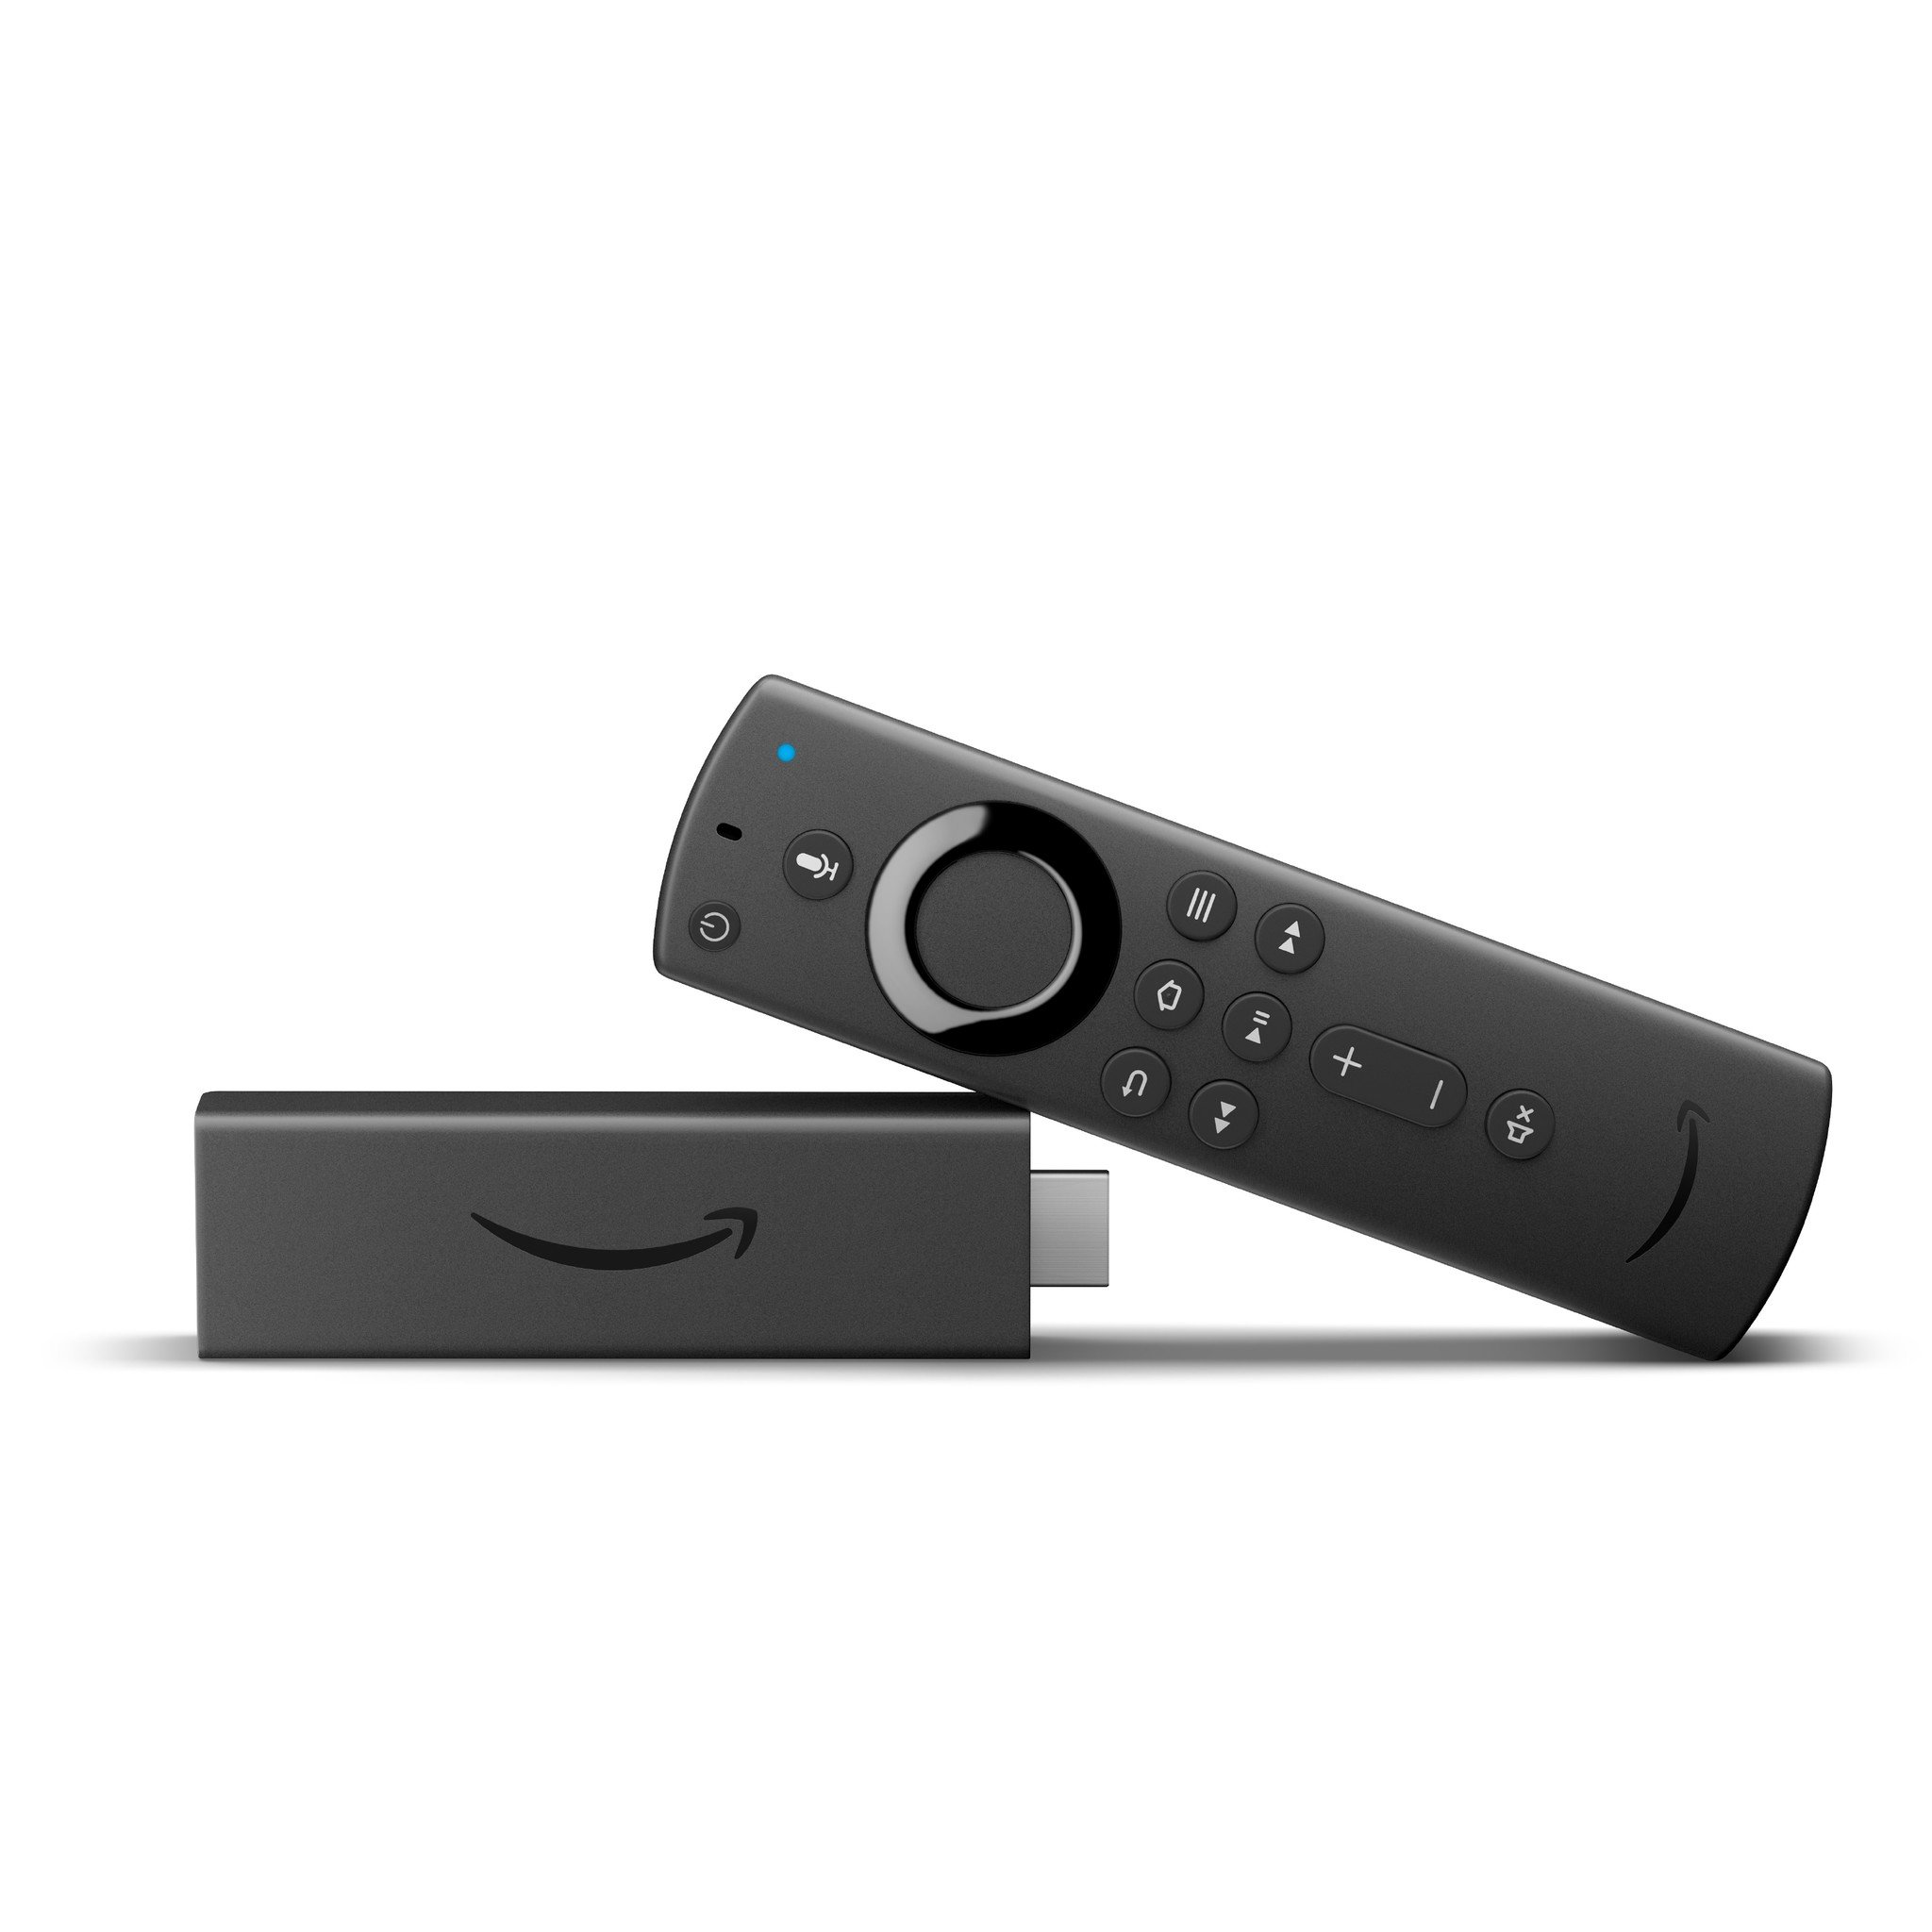 Amazon Fire Tv Cube 2019 Vs Amazon Fire Tv Stick 4k Which Should You Buy Android Central